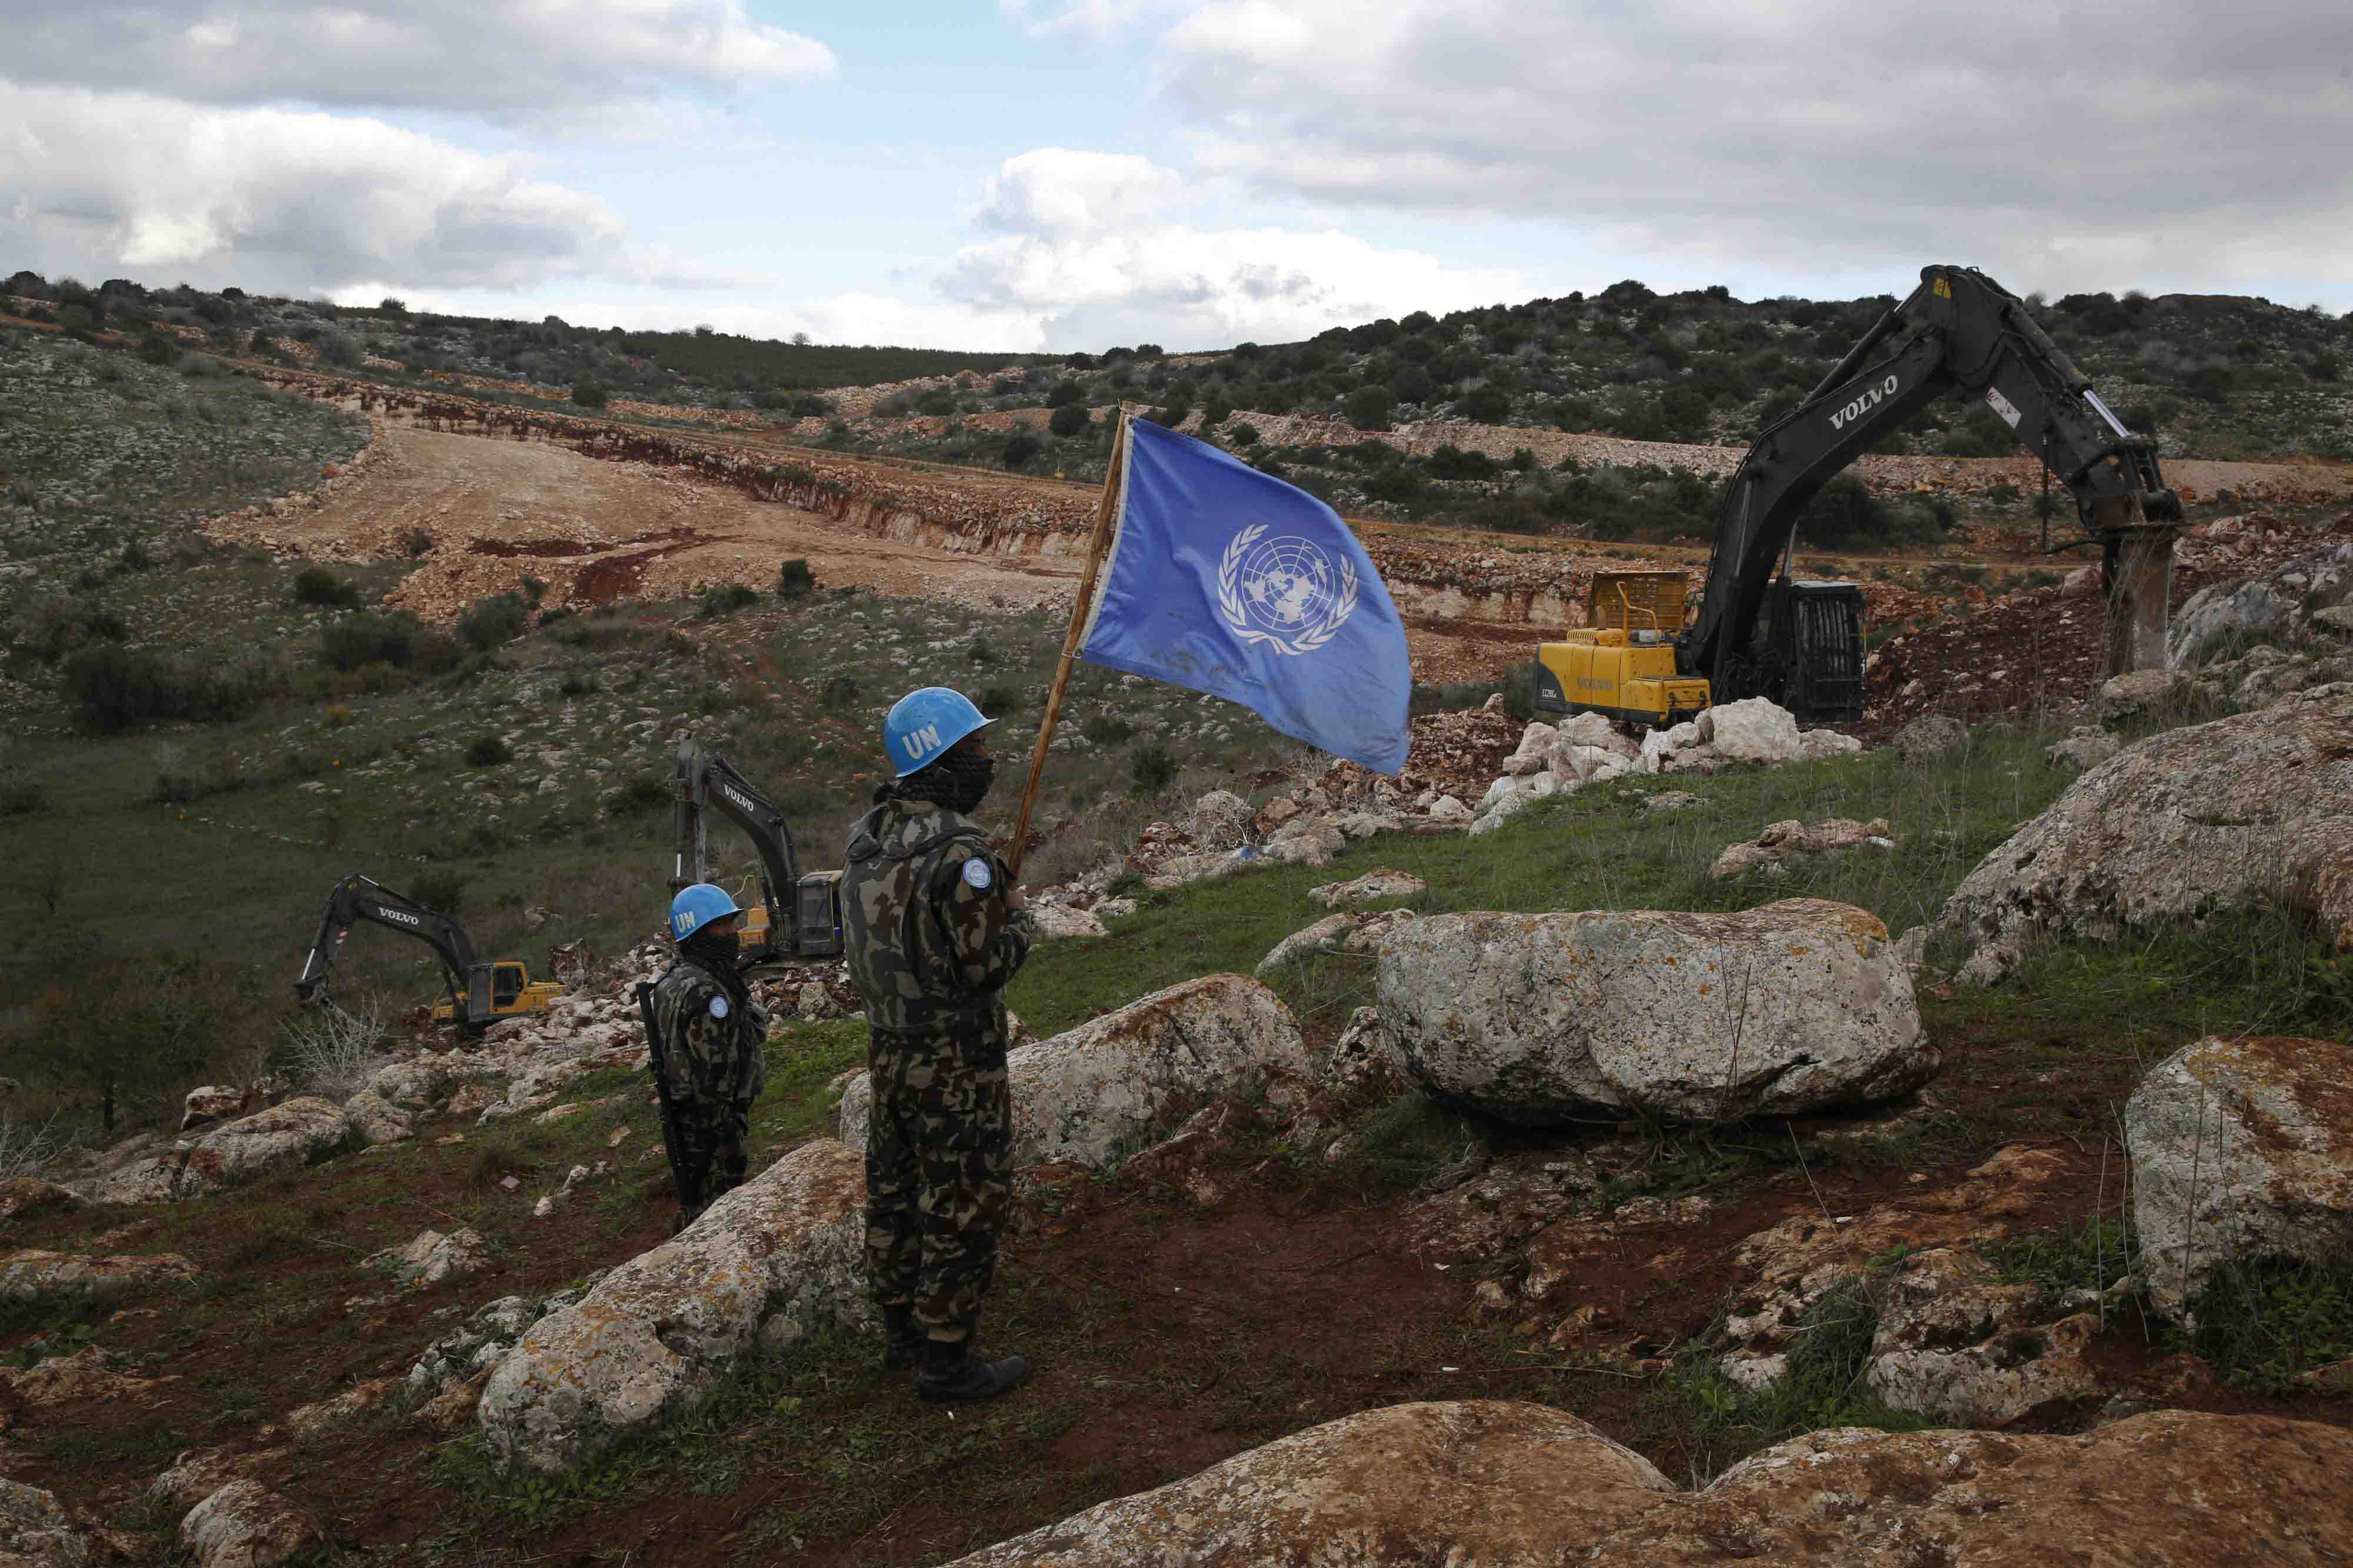 UNIFIL on Thursday said the tunnel was the third to have crossed the "blue line", a demarcation line drawn by the UN